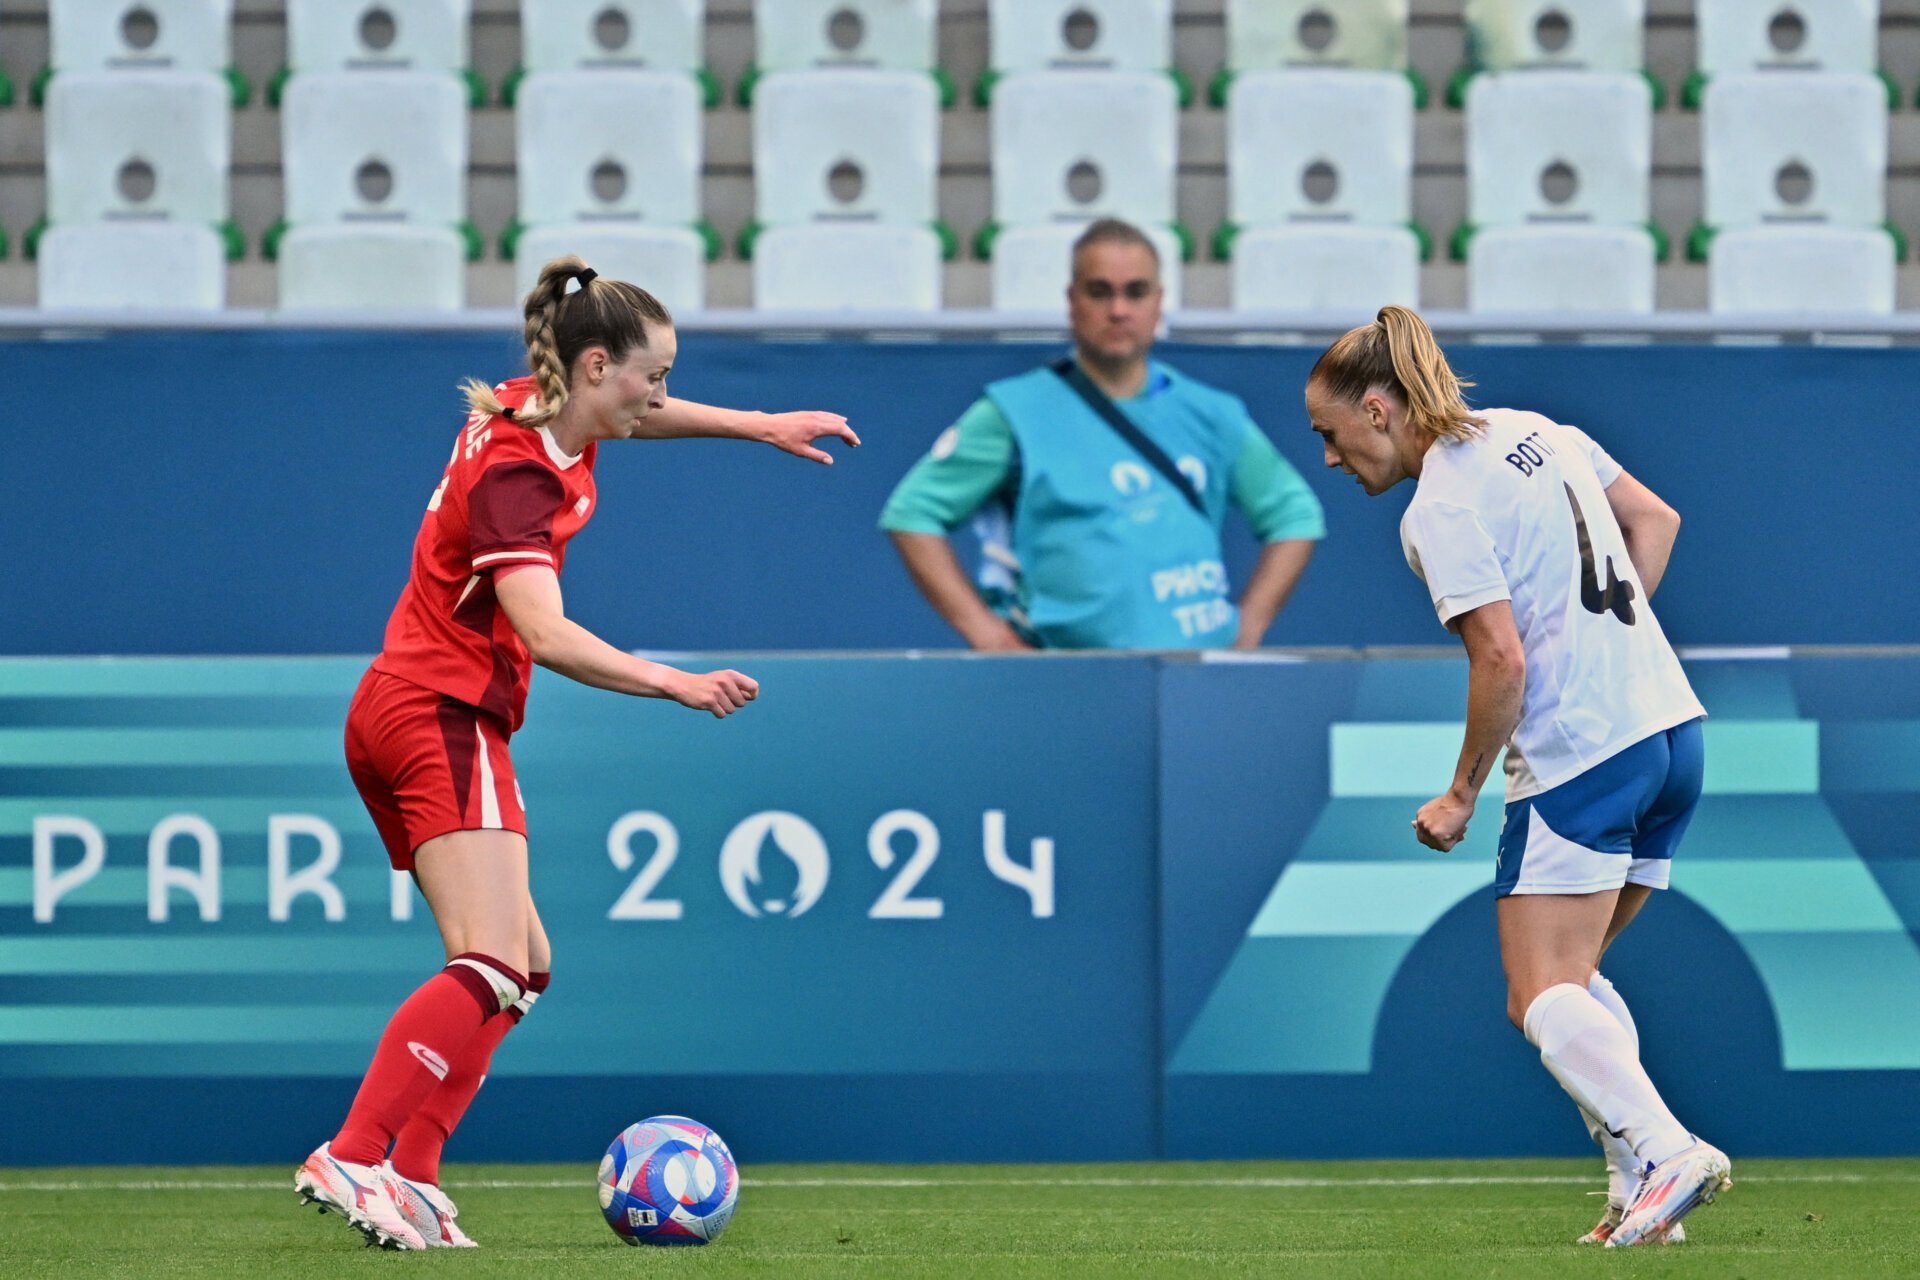 Drone Spying Just Cost Canada Women’s Soccer 6 Points in the Paris Olympics